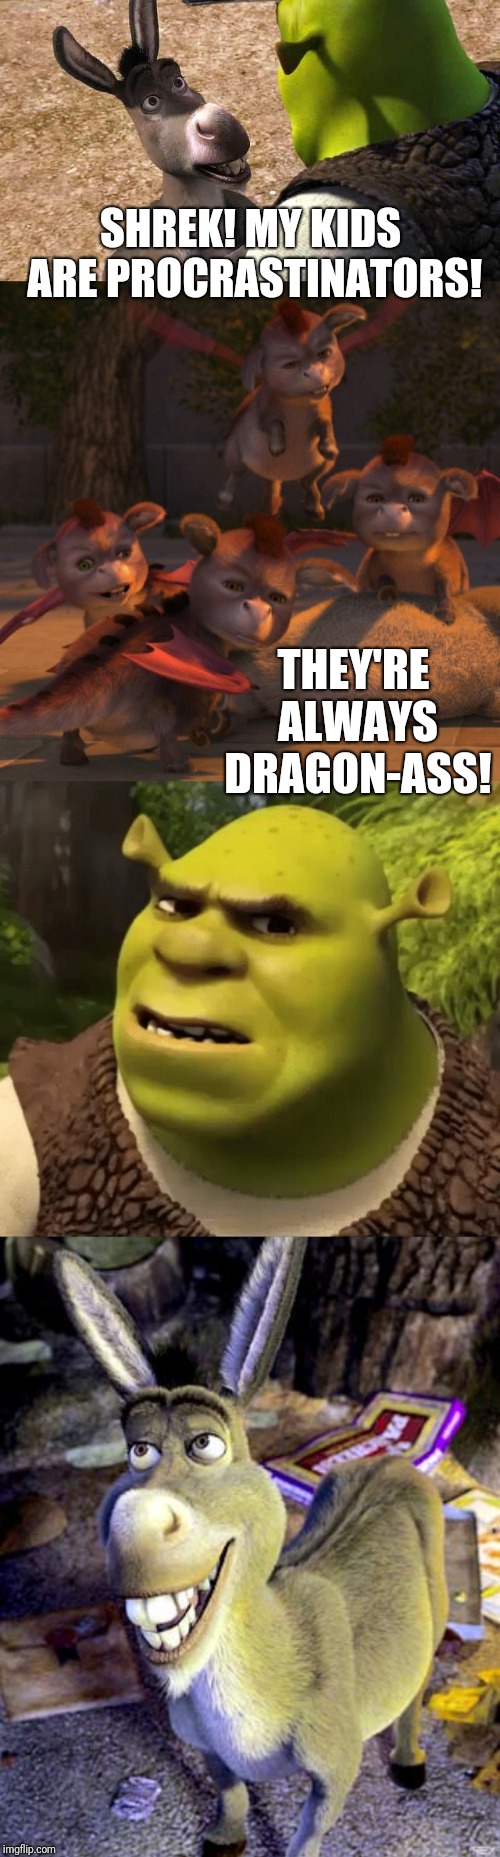 Well, they ARE! | SHREK! MY KIDS ARE PROCRASTINATORS! THEY'RE ALWAYS DRAGON-ASS! | image tagged in do i detect a hint of x,donkey yells at shrek,memes,procrastination,procrastinate,baby | made w/ Imgflip meme maker